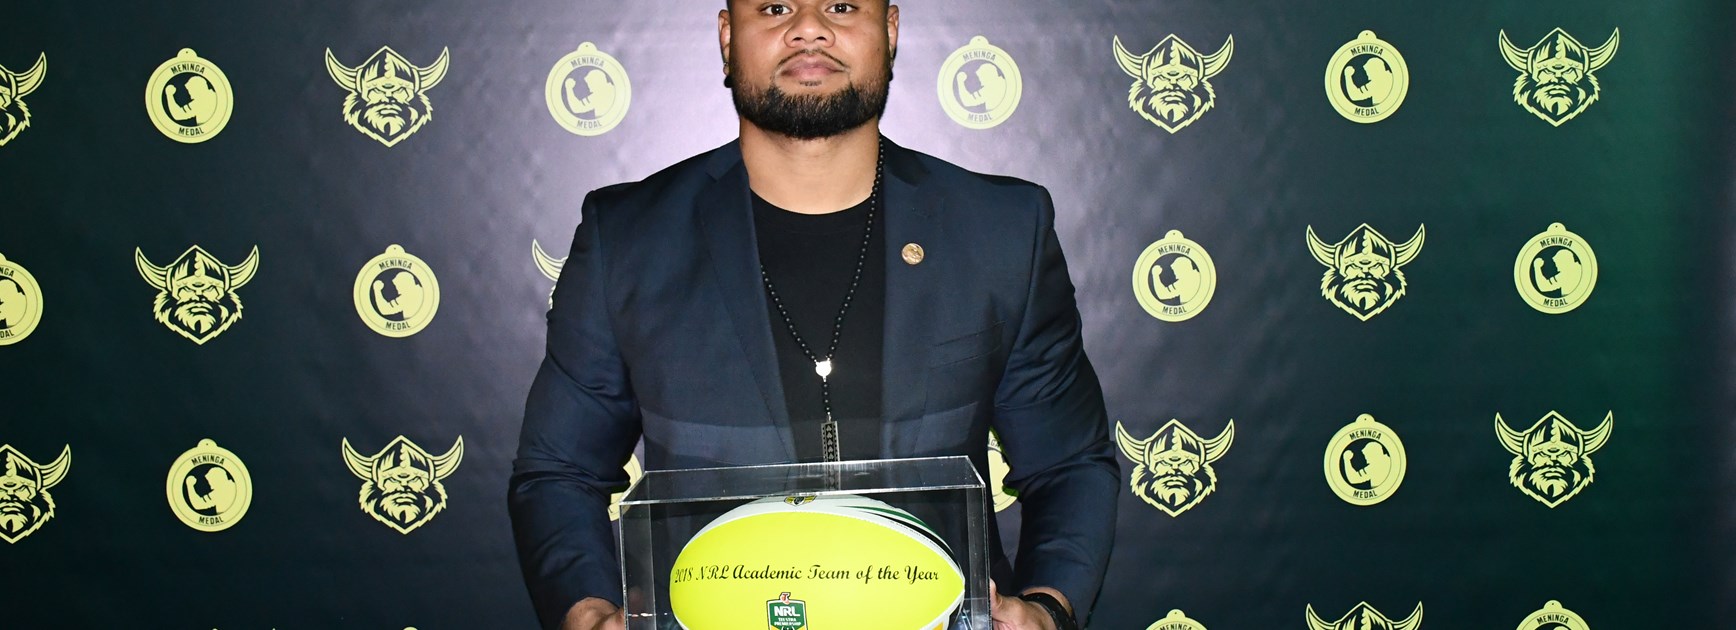 NRL's Academic Team of the Year announced